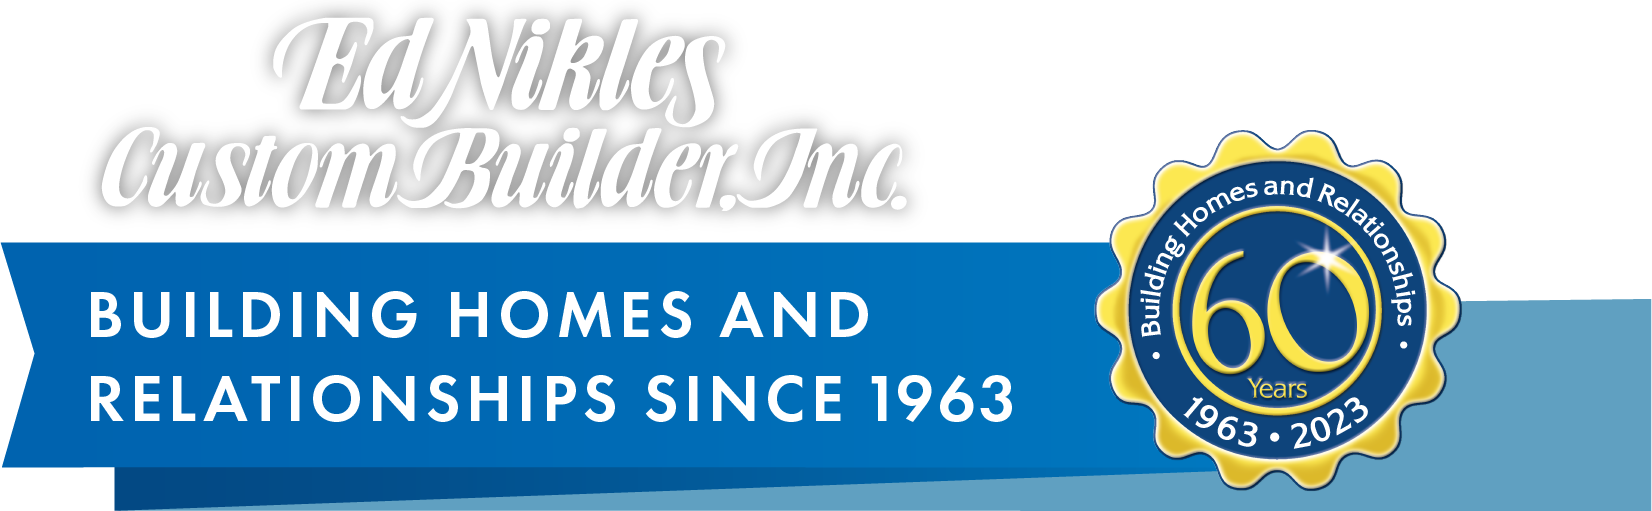 Ed Nikles Custom Builder Inc. - Building homes and relationships since 1963